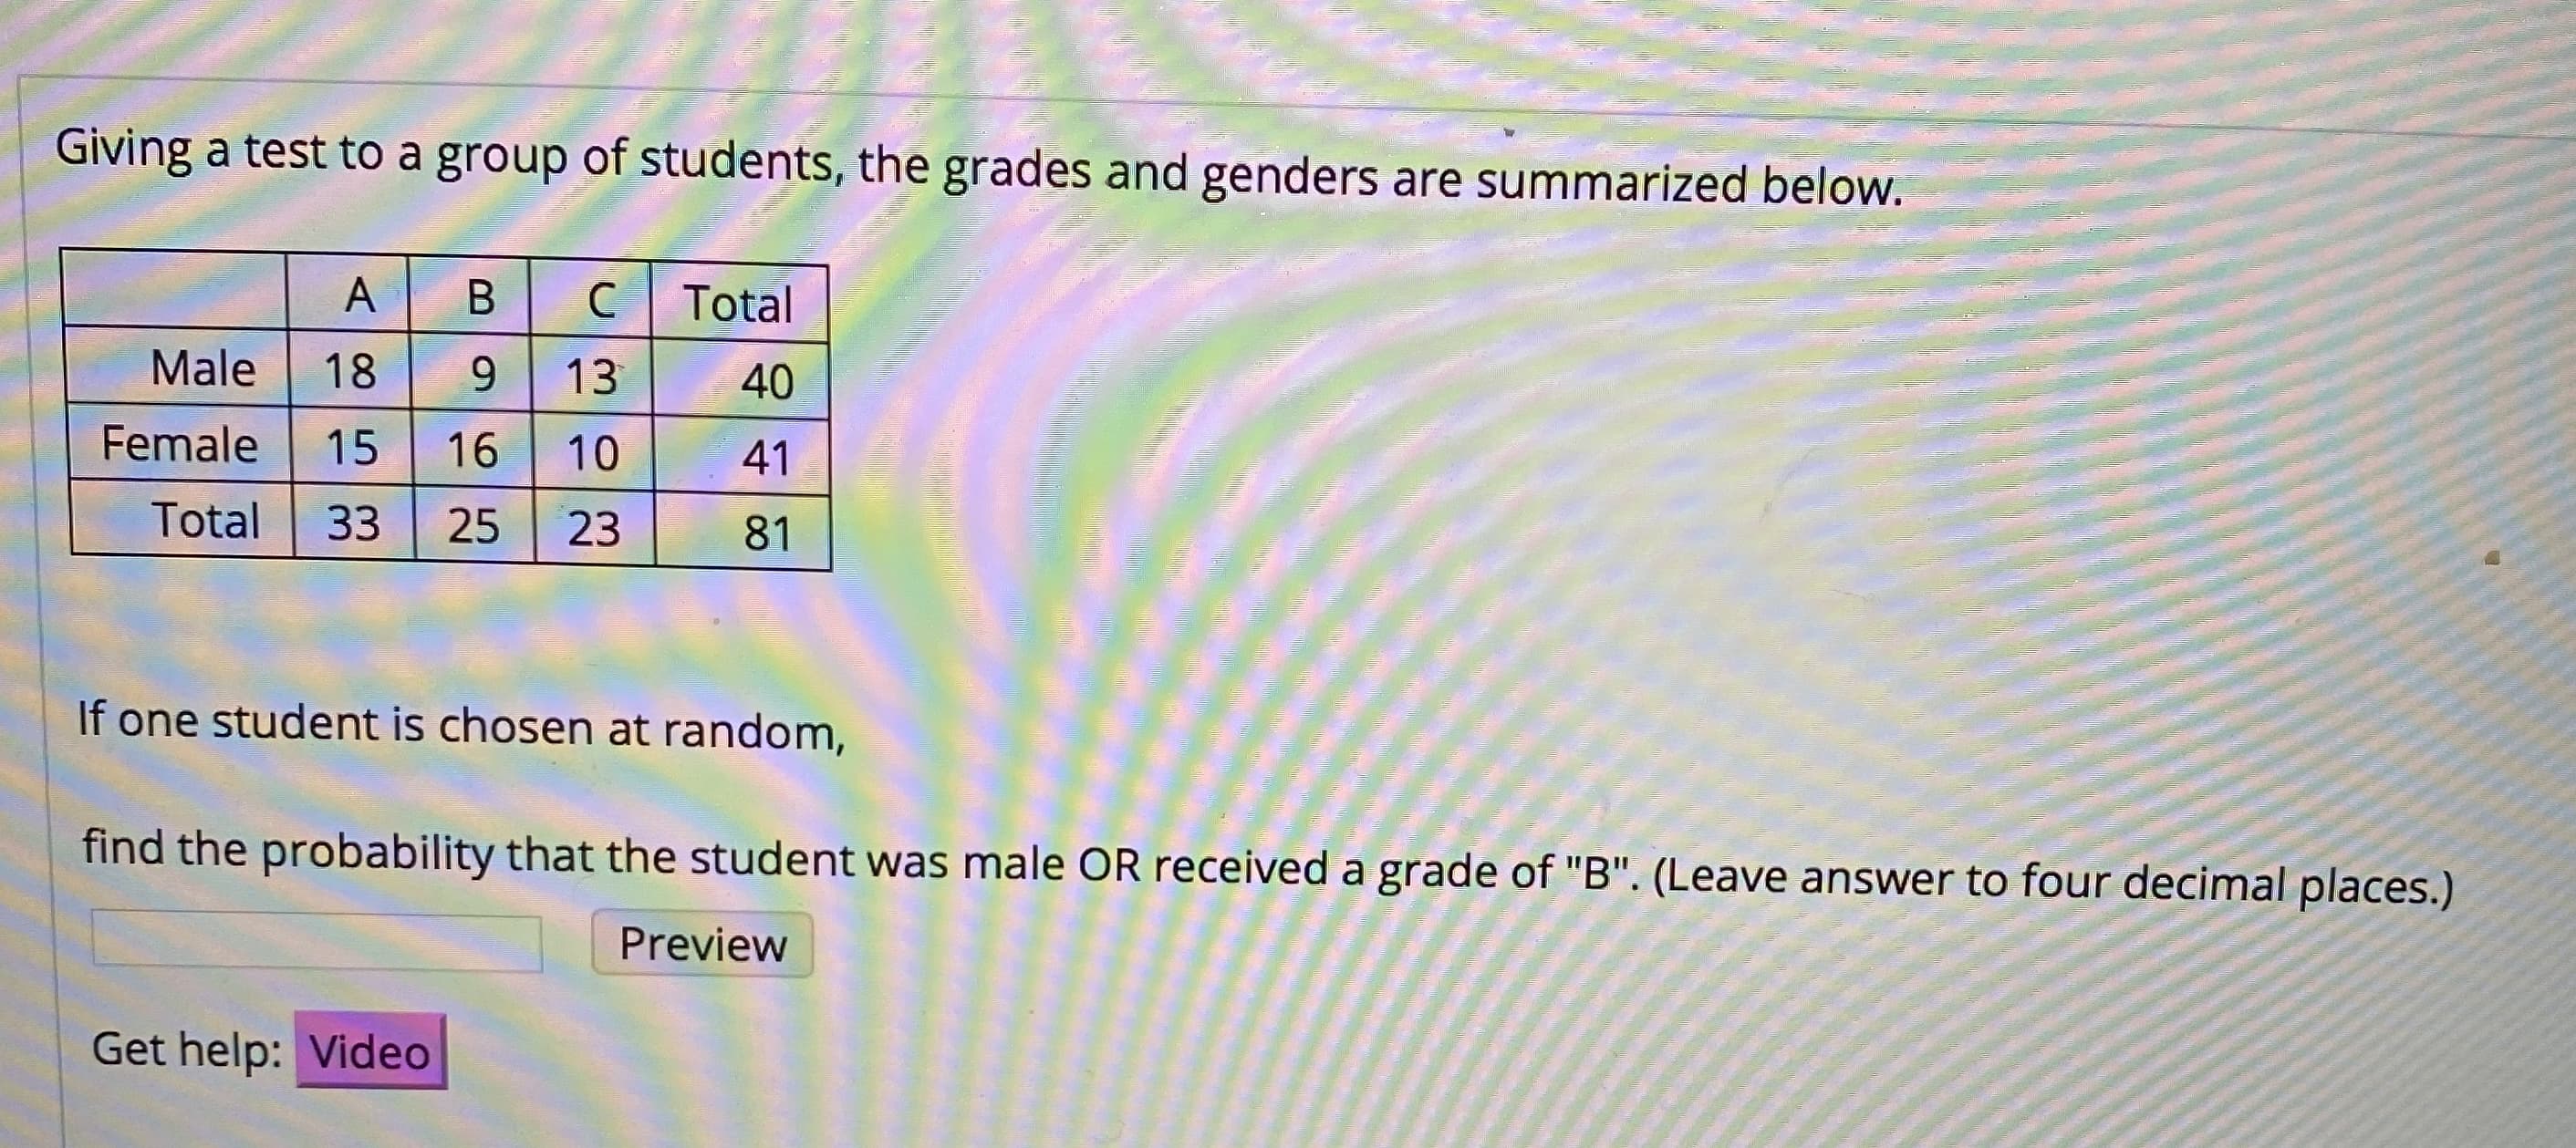 Giving a test to a group of students, the grades and genders are summarized below.
B
Total
Male
18
9.
13
40
Female
15
16
10
41
Total
33
25
23
81
If one student is chosen at random,
find the probability that the student was male OR received a grade of "B". (Leave answer to four decimal places.)
Preview
Get help: Video
